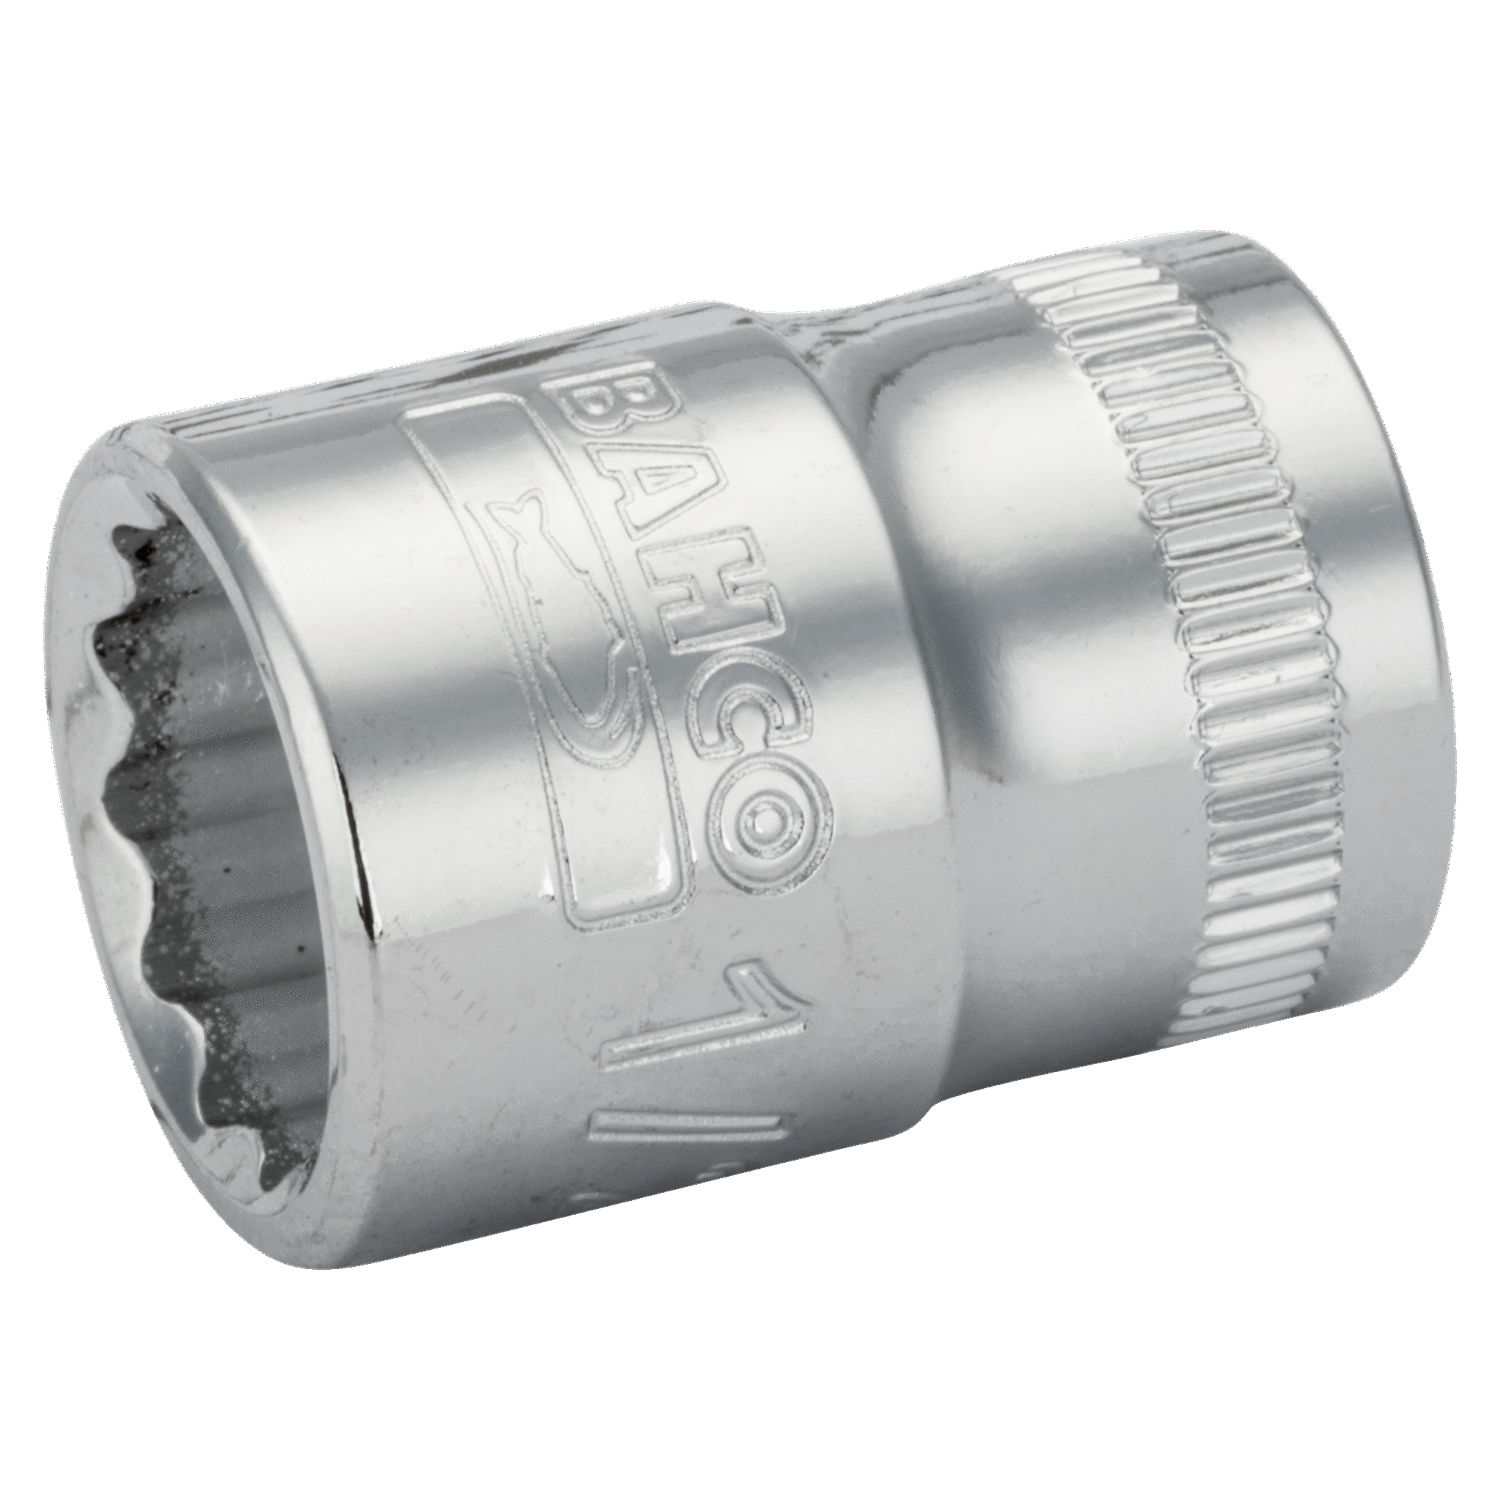 BAHCO A7400DZ 3/8" Square Drive Socket Imperial Bi-Hex Profile - Premium Square Drive Socket from BAHCO - Shop now at Yew Aik.